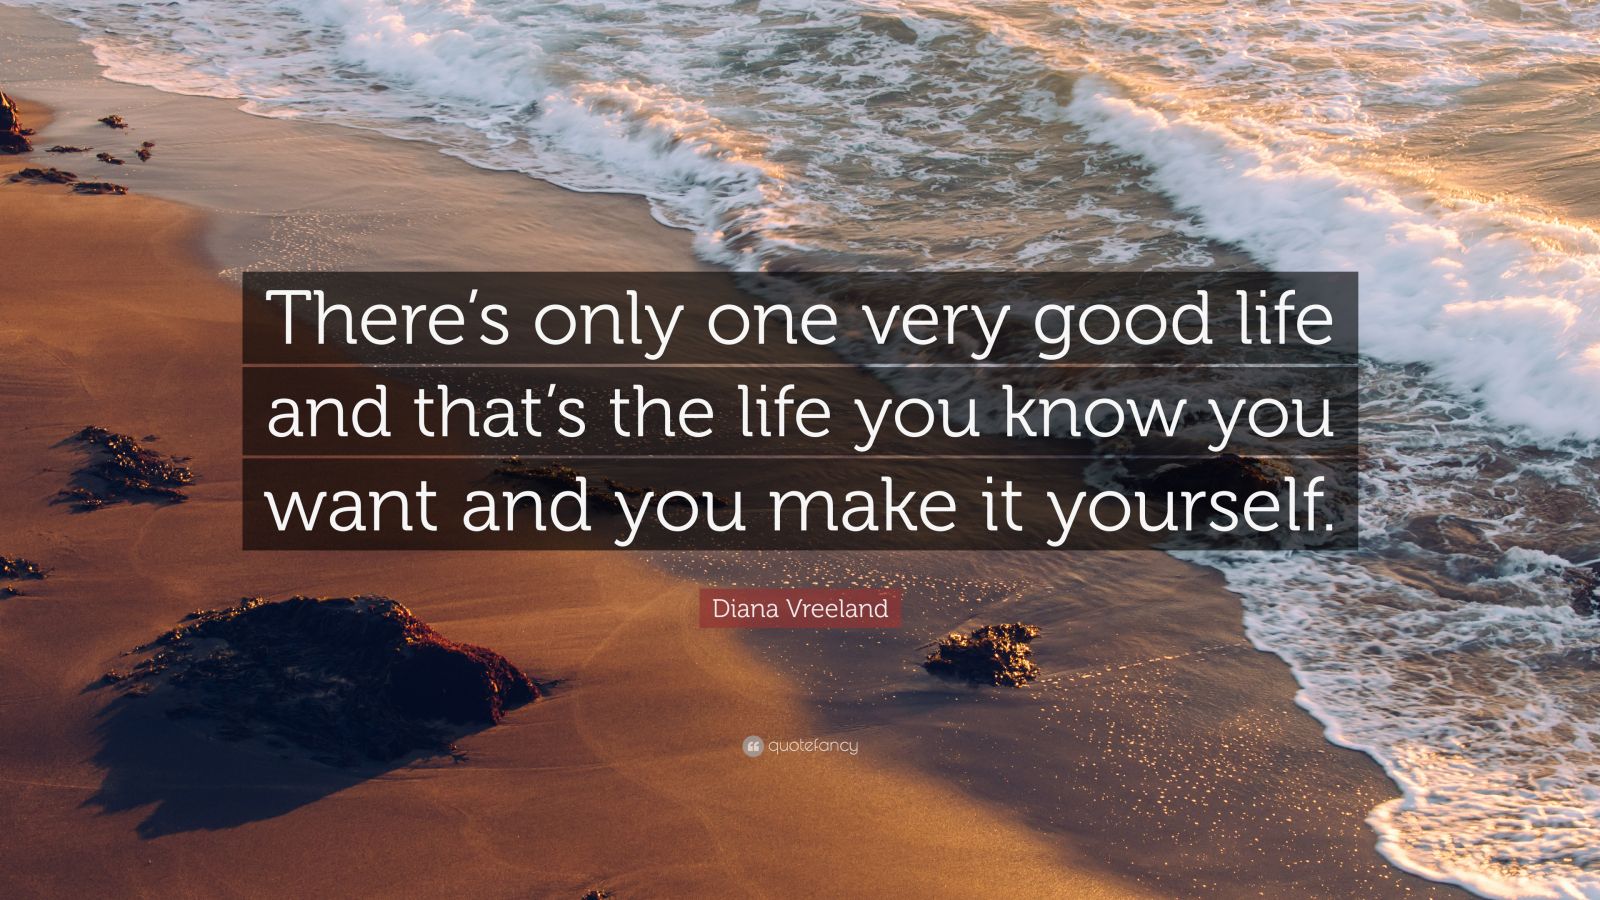 Diana Vreeland Quote: “There’s only one very good life and that’s the ...